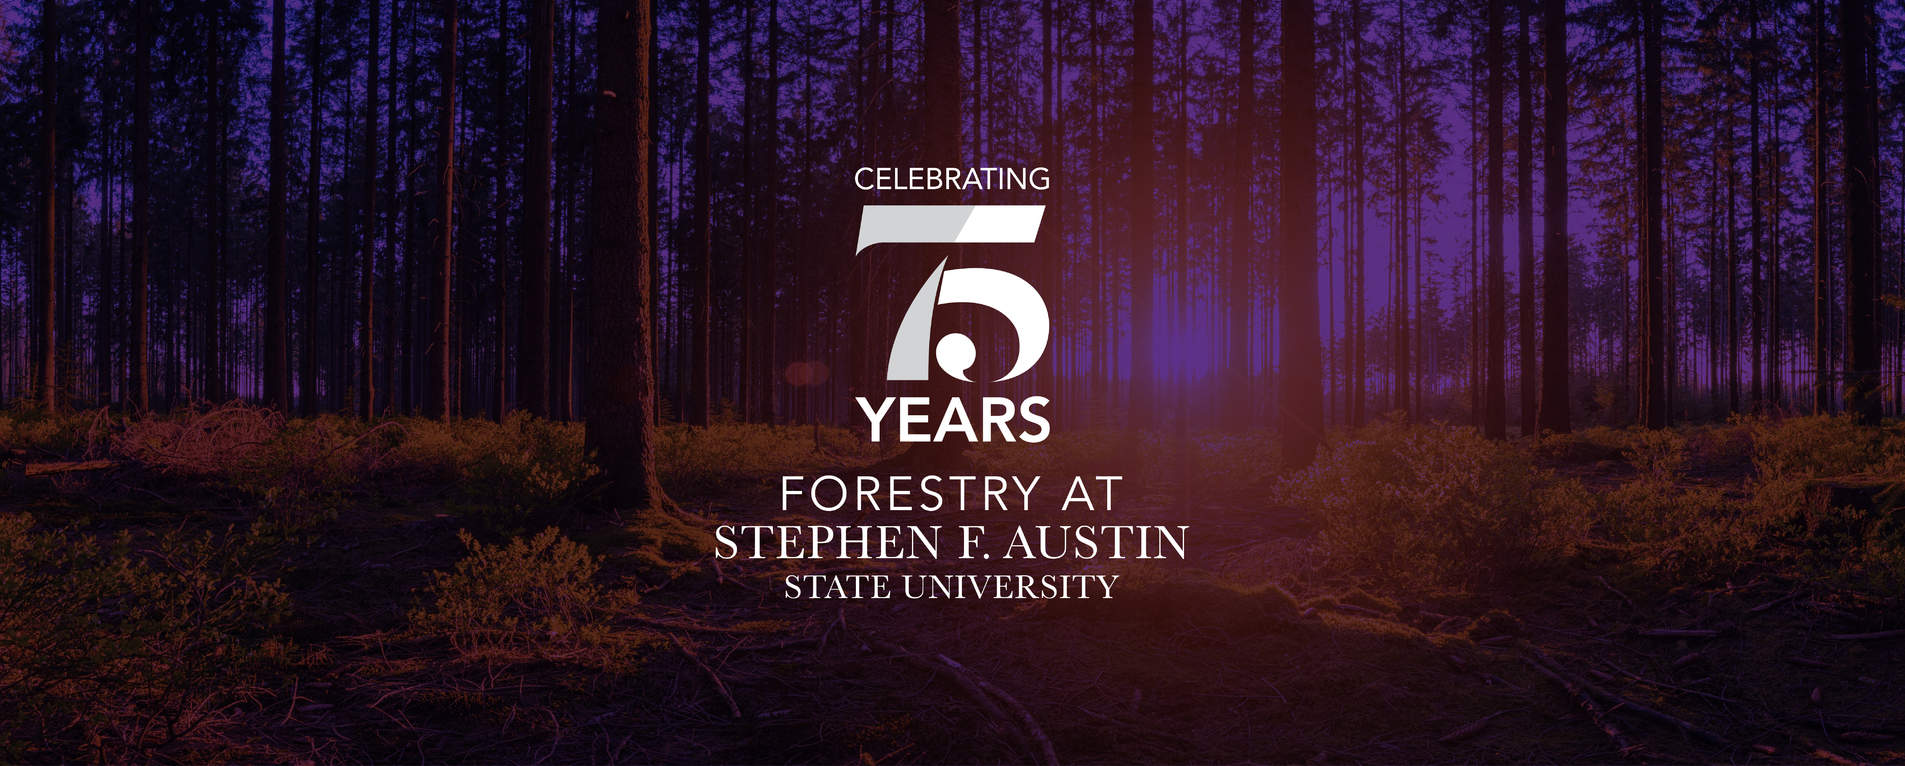 celebrating 75 years of forestry at S F A